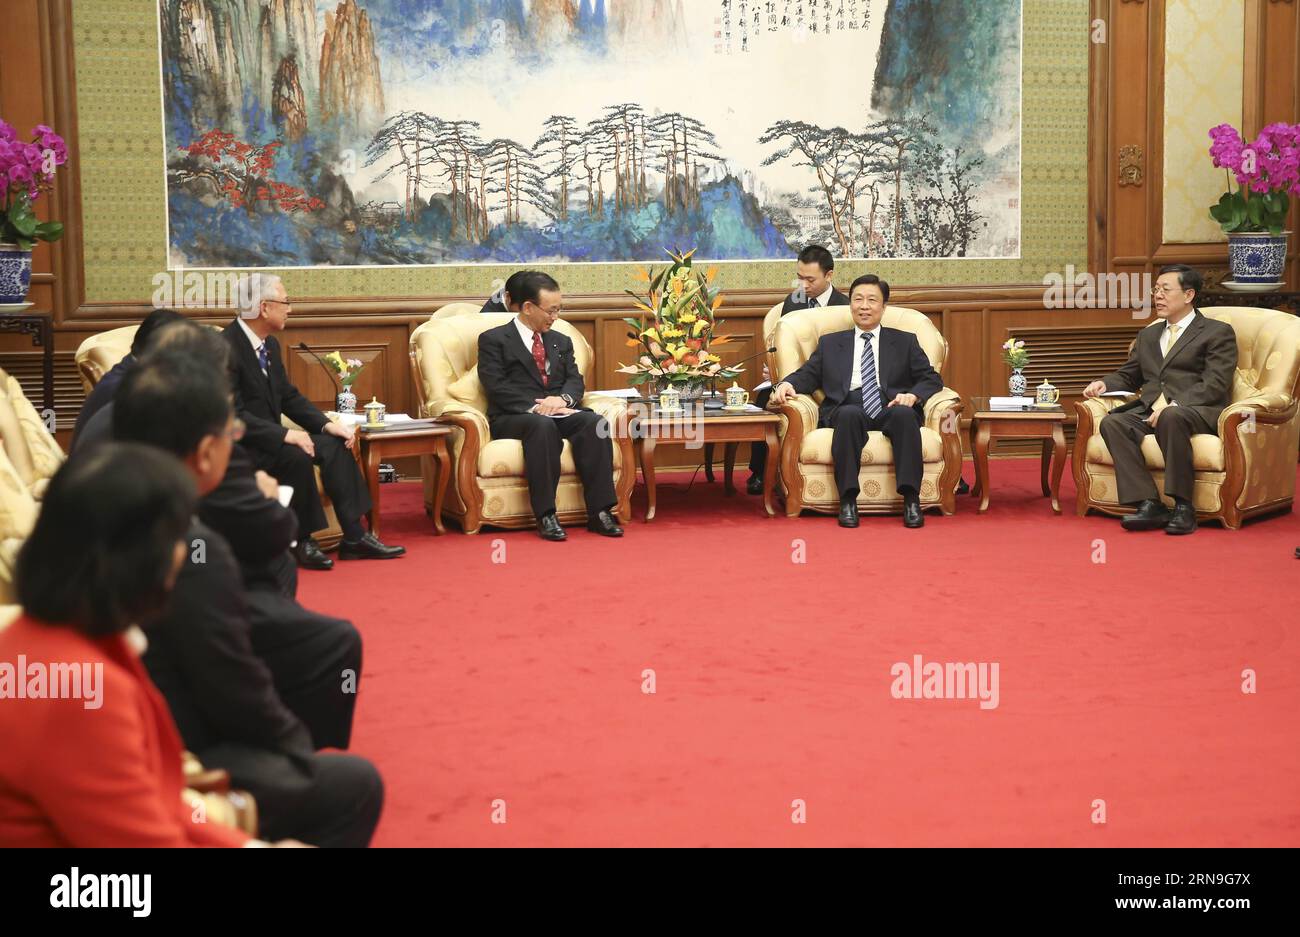 Chinese Vice President Li Yuanchao (2nd R, front) meets with a Japanese delegation led by Secretary General of the Liberal Democratic Party Tanigaki Sadakazu and Secretary General of the Komei Party Yoshihisa Inoue, in Beijing, capital of China, Dec. 4, 2015. )(mcg) CHINA-BEIJING-LI YUANCHAO-JAPANESE DELEGATION-MEETING (CN) DingxLin PUBLICATIONxNOTxINxCHN   Chinese Vice President left Yuan Chao 2nd r Front Meets With a Japanese Delegation Led by Secretary General of The Liberal Democratic Party Tanigaki Sadakazu and Secretary General of The Komei Party Yoshihisa Inoue in Beijing Capital of Chi Stock Photo